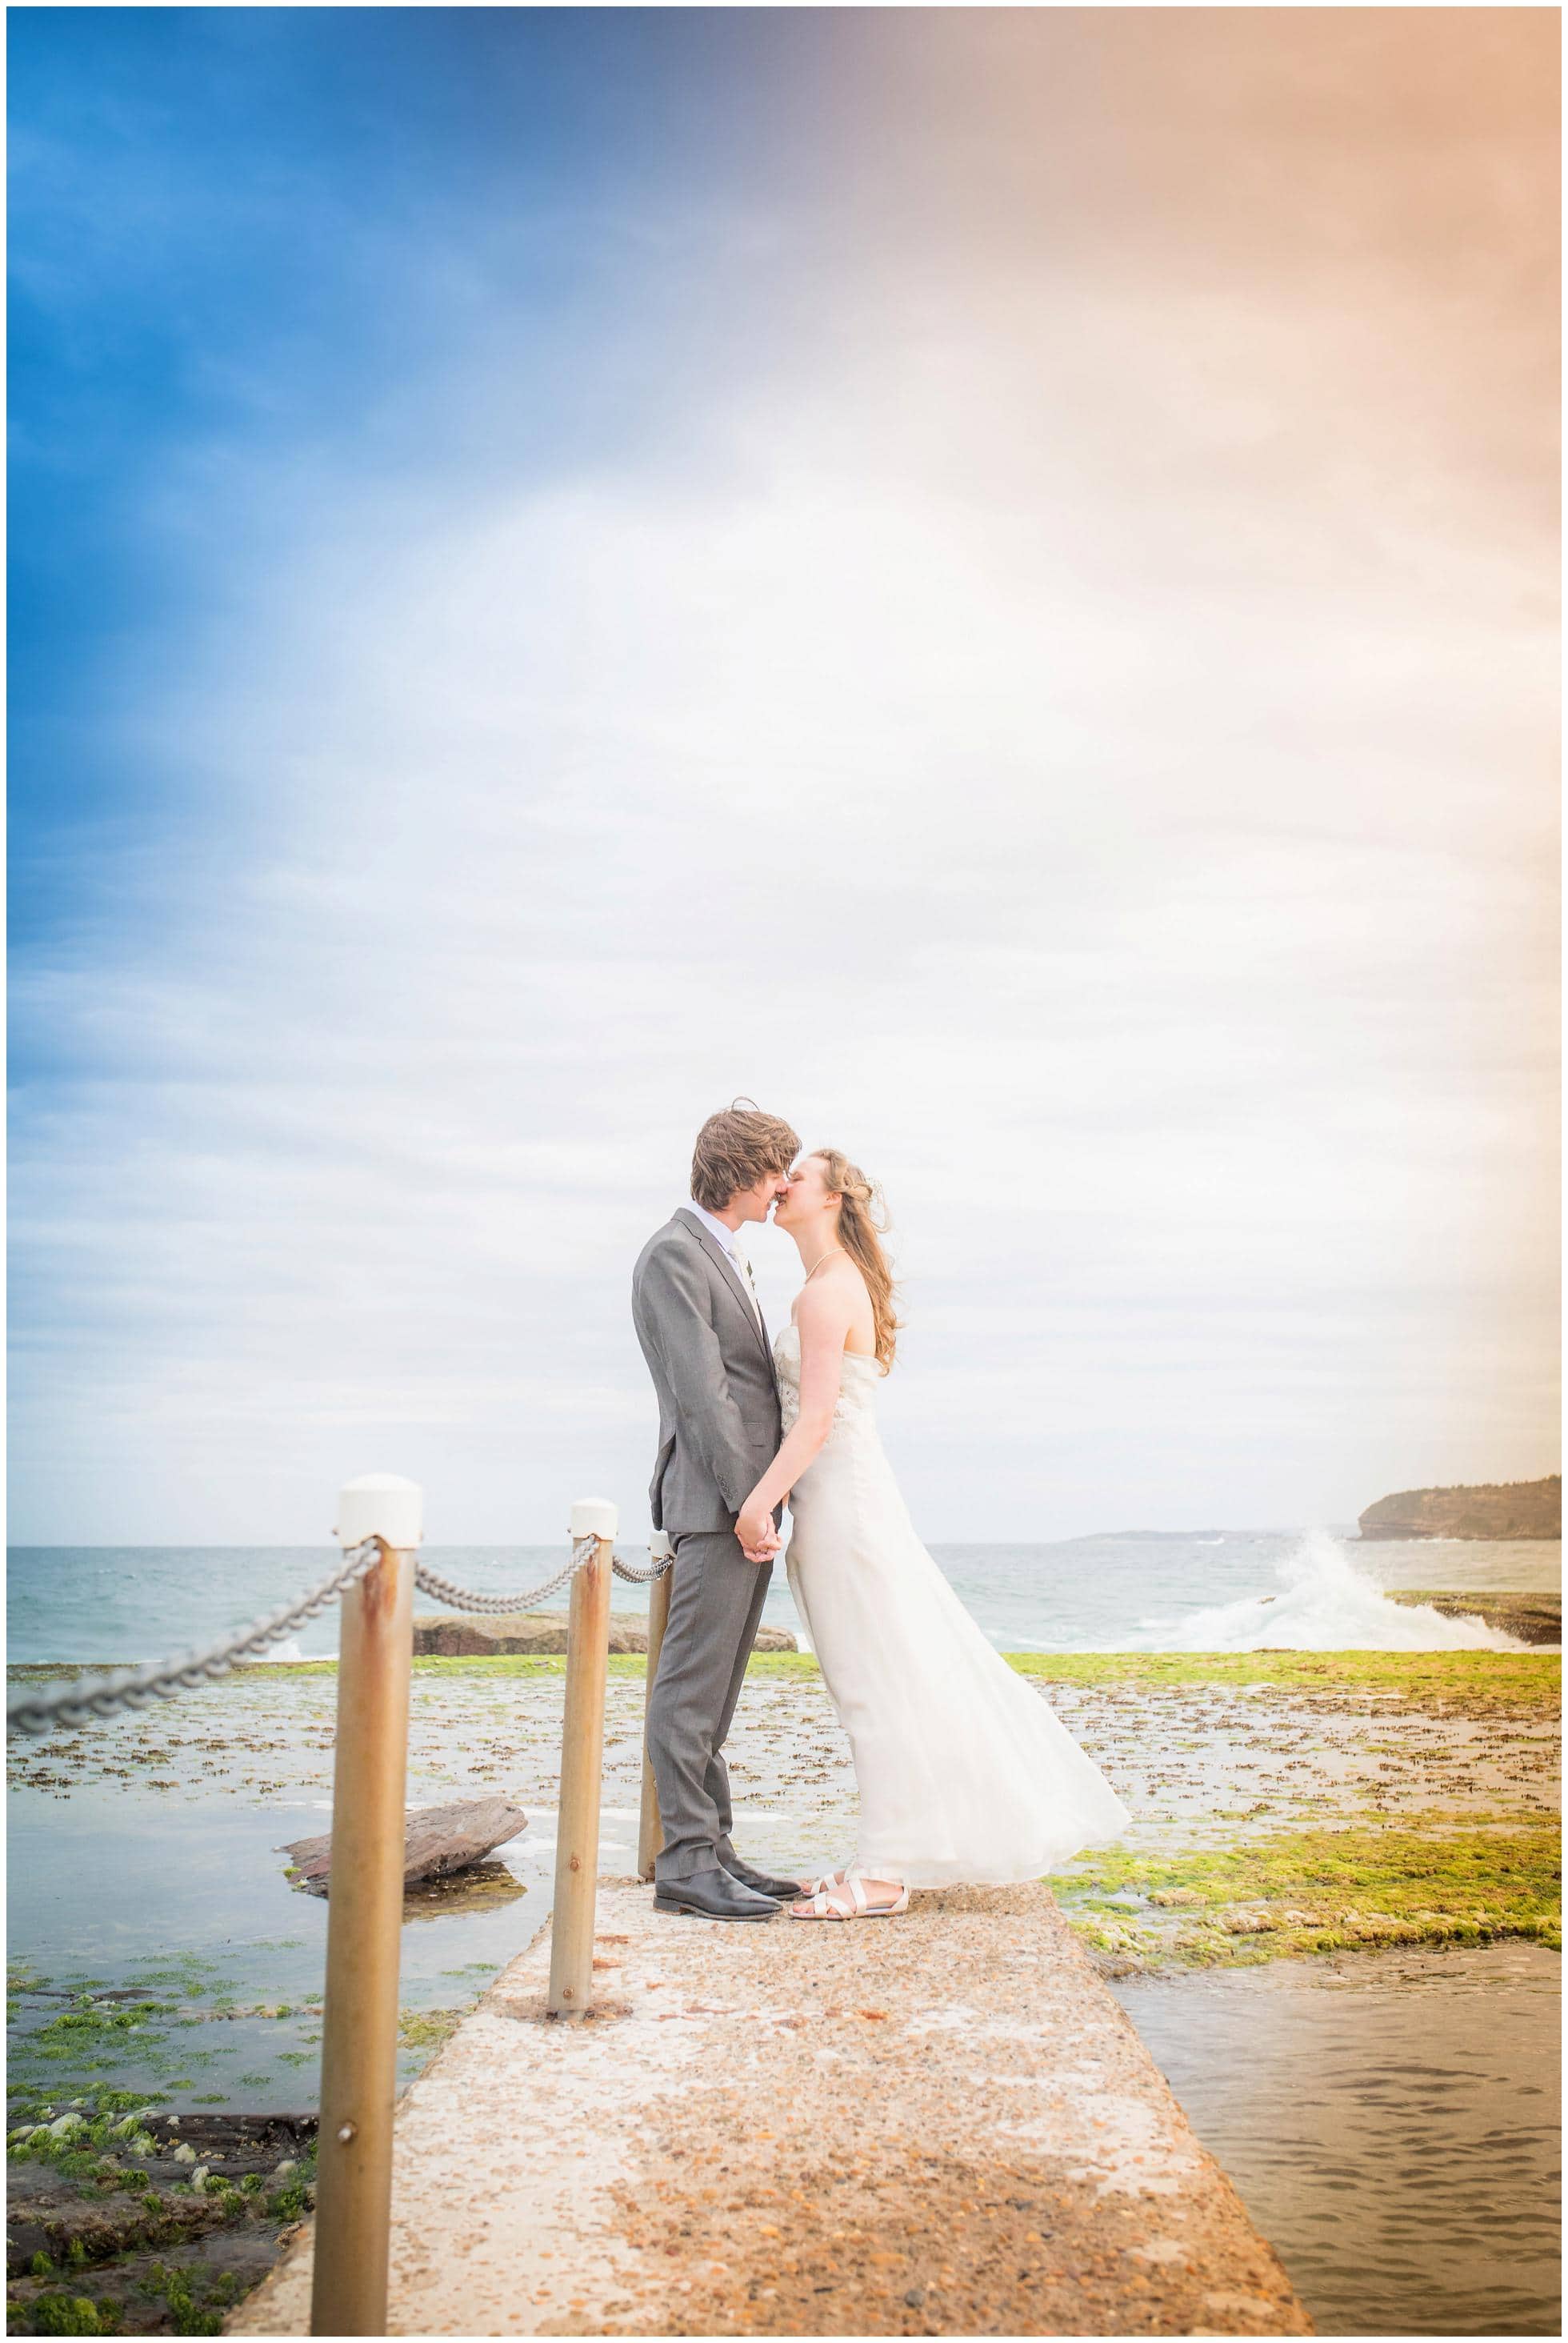 Romantic Mona Vale Wedding Photography on the rocks by the swimming pool.